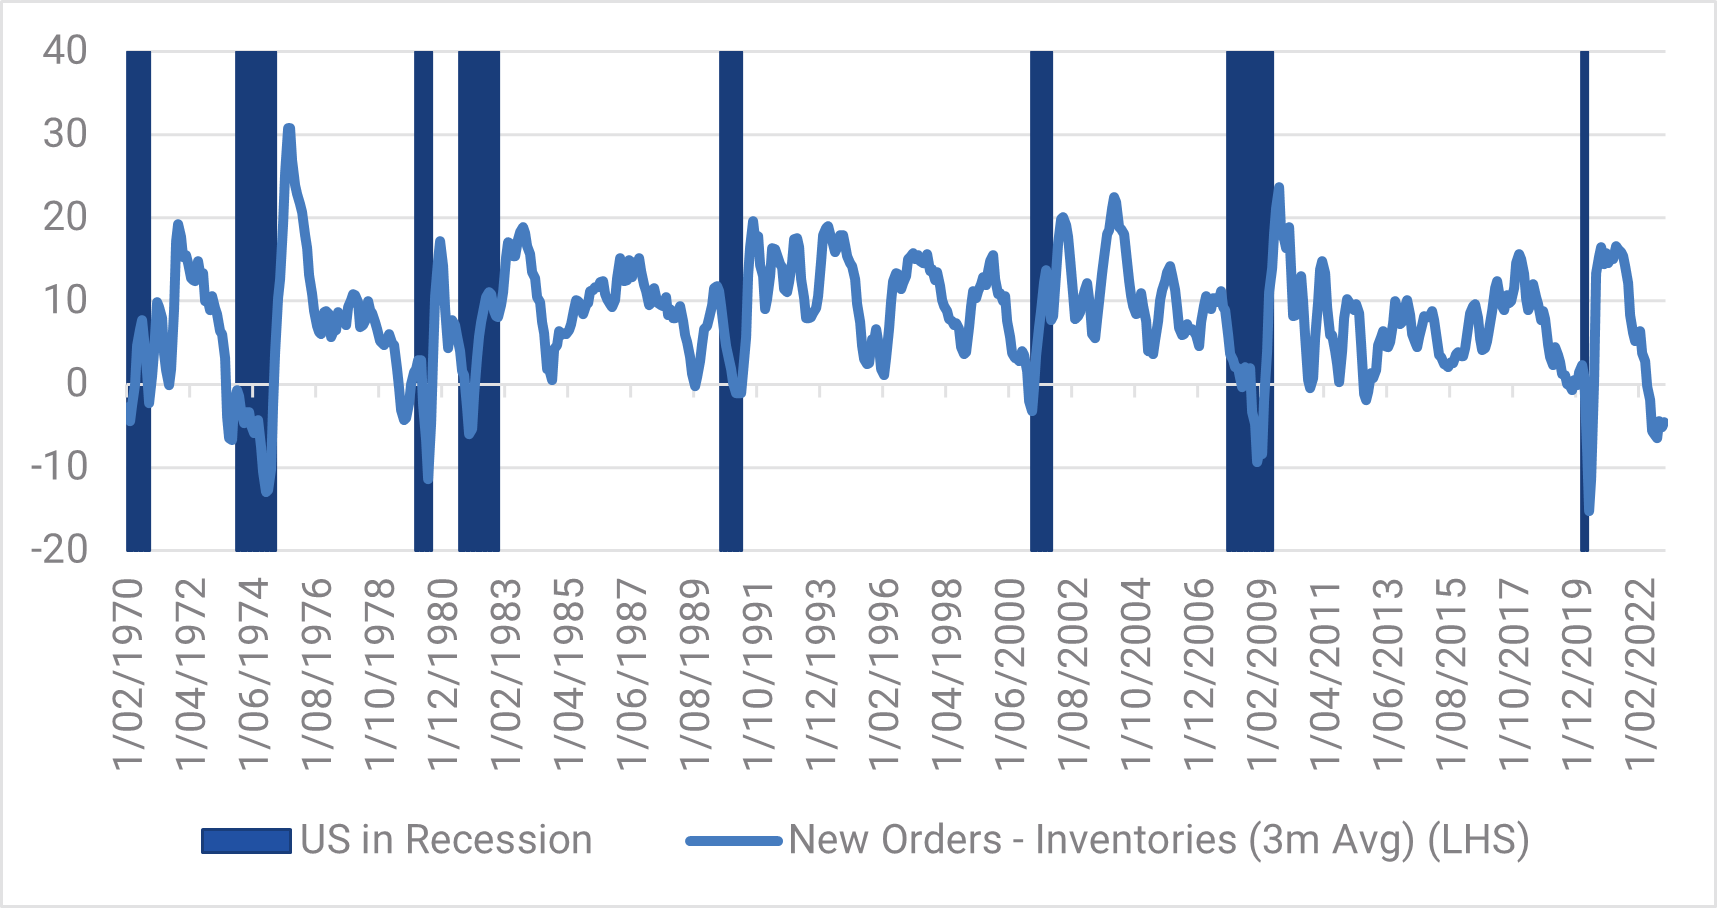 
Chart 8: New Orders Minus Inventories and US Recession

Source: YarraCM, Bloomberg